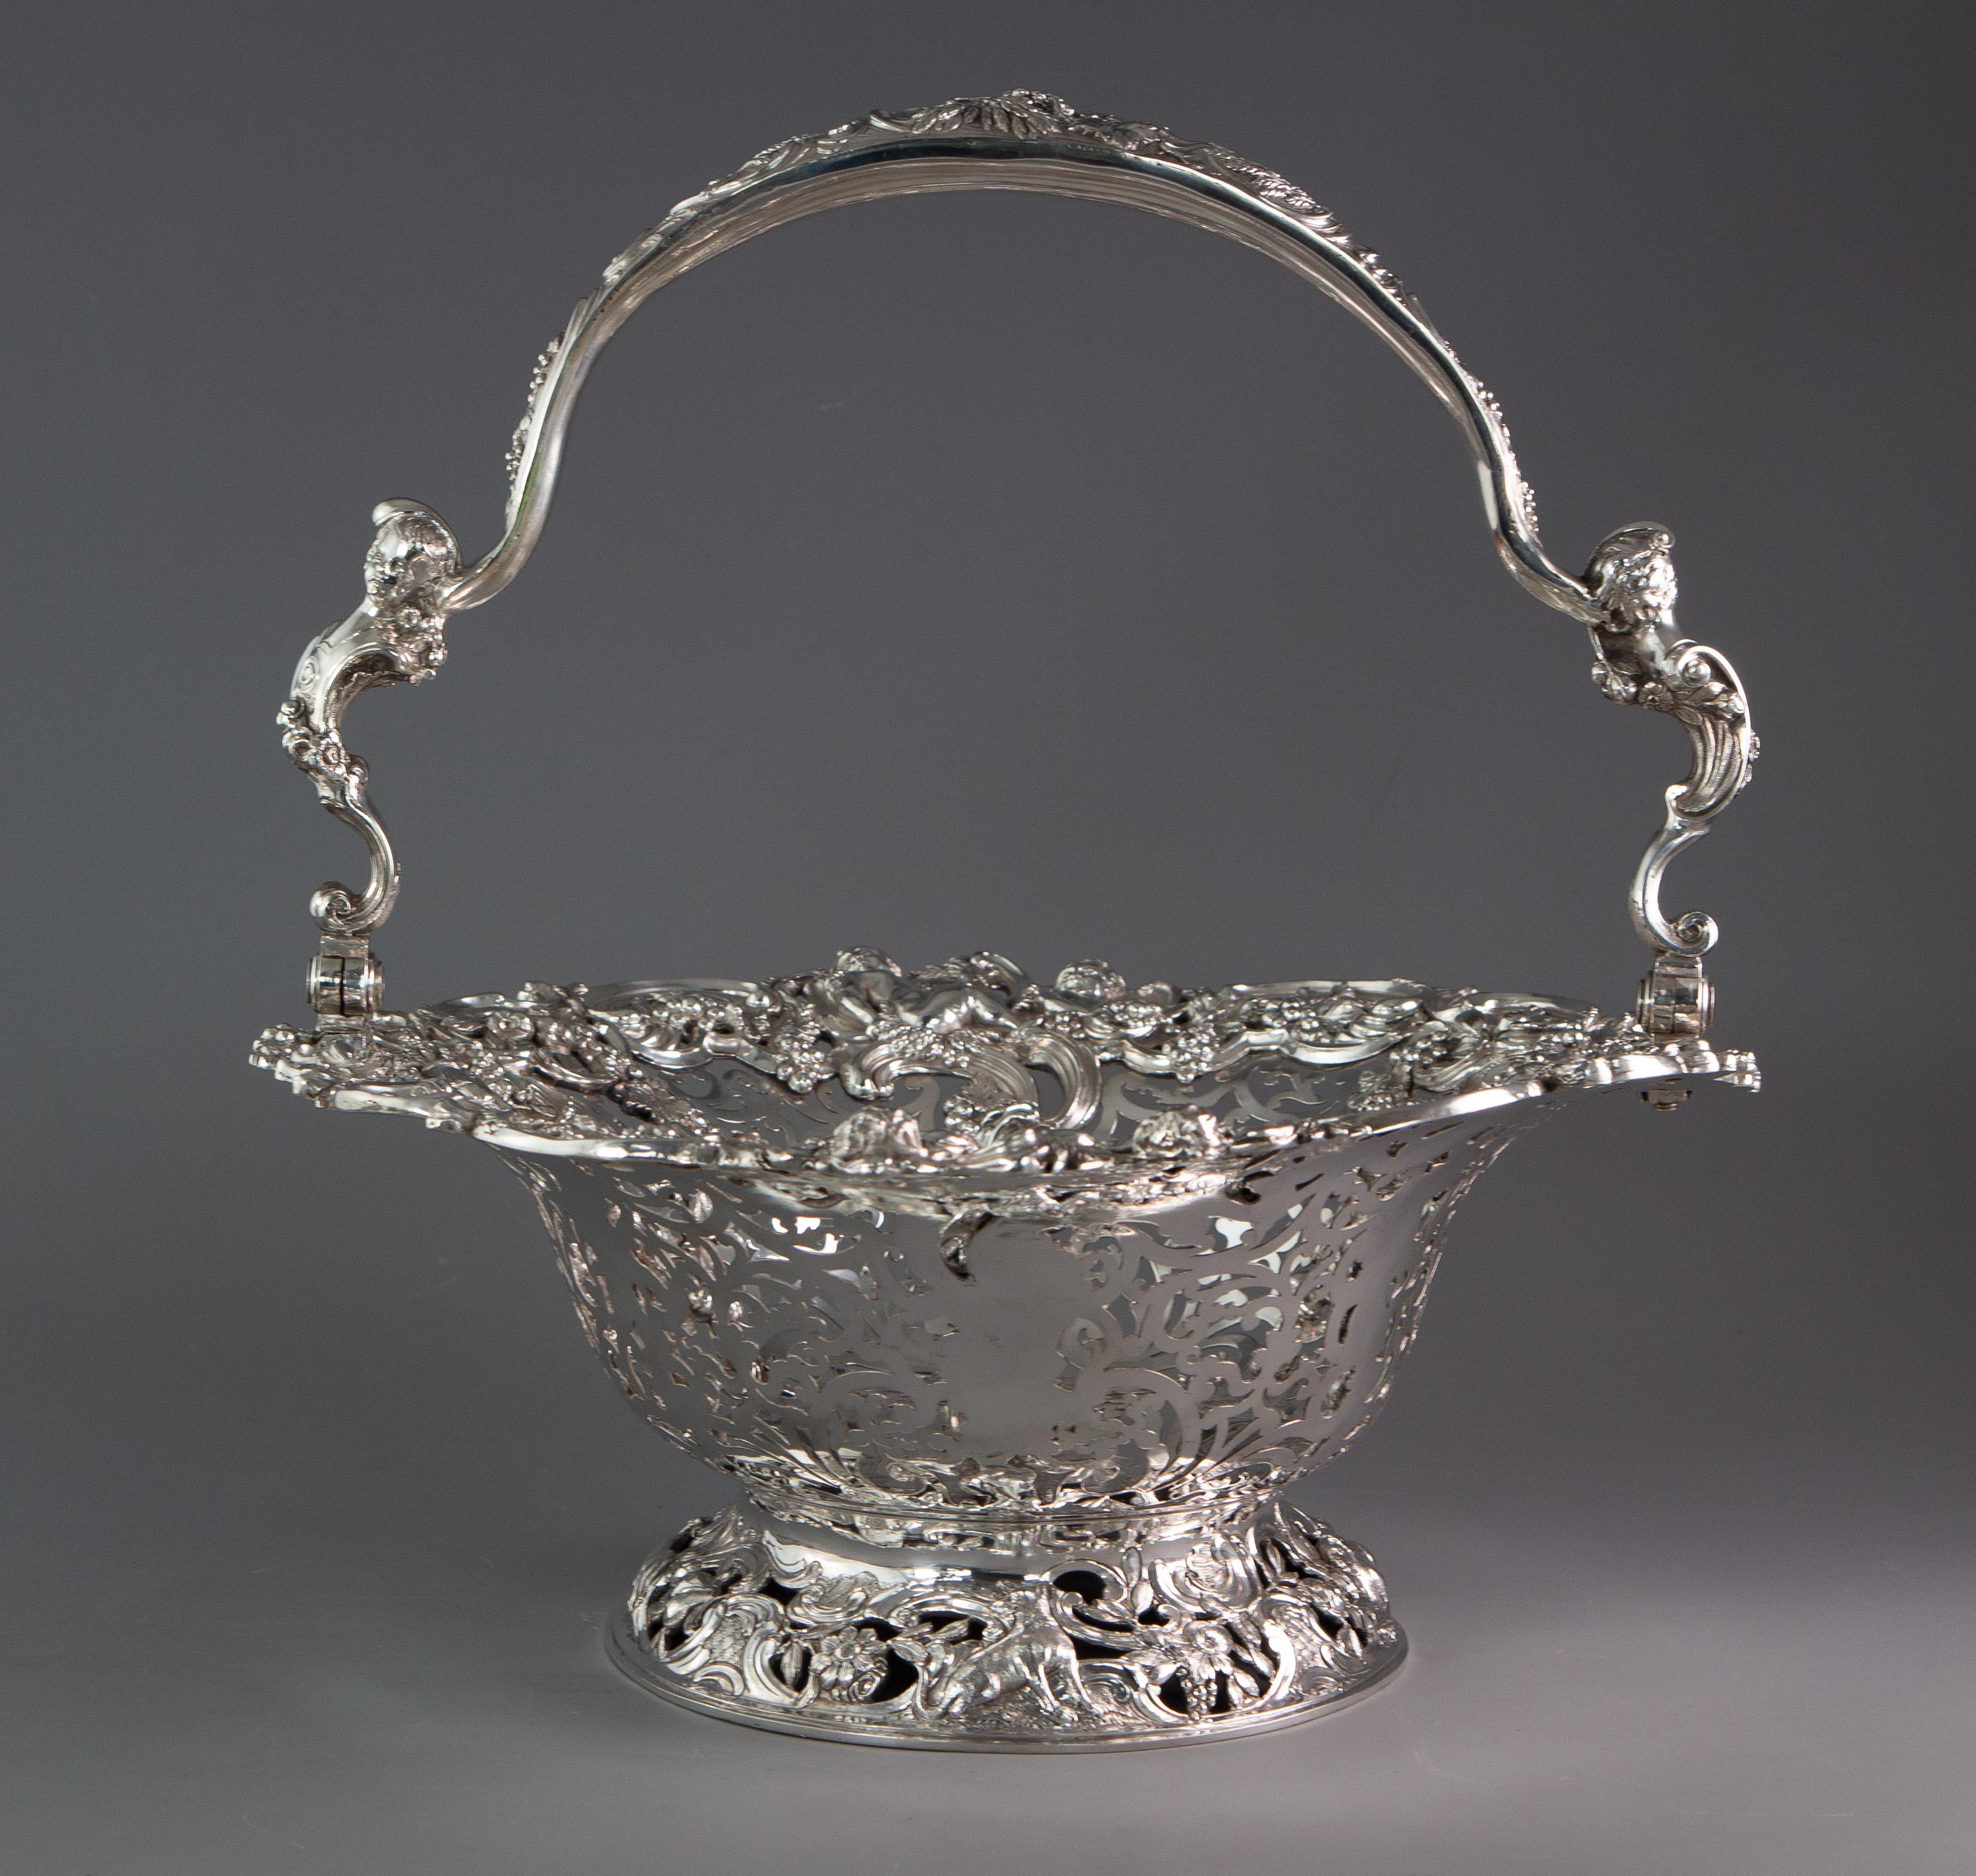 British Royal Interest, a George II Silver Harvest Basket London 1759, by William Tuite For Sale